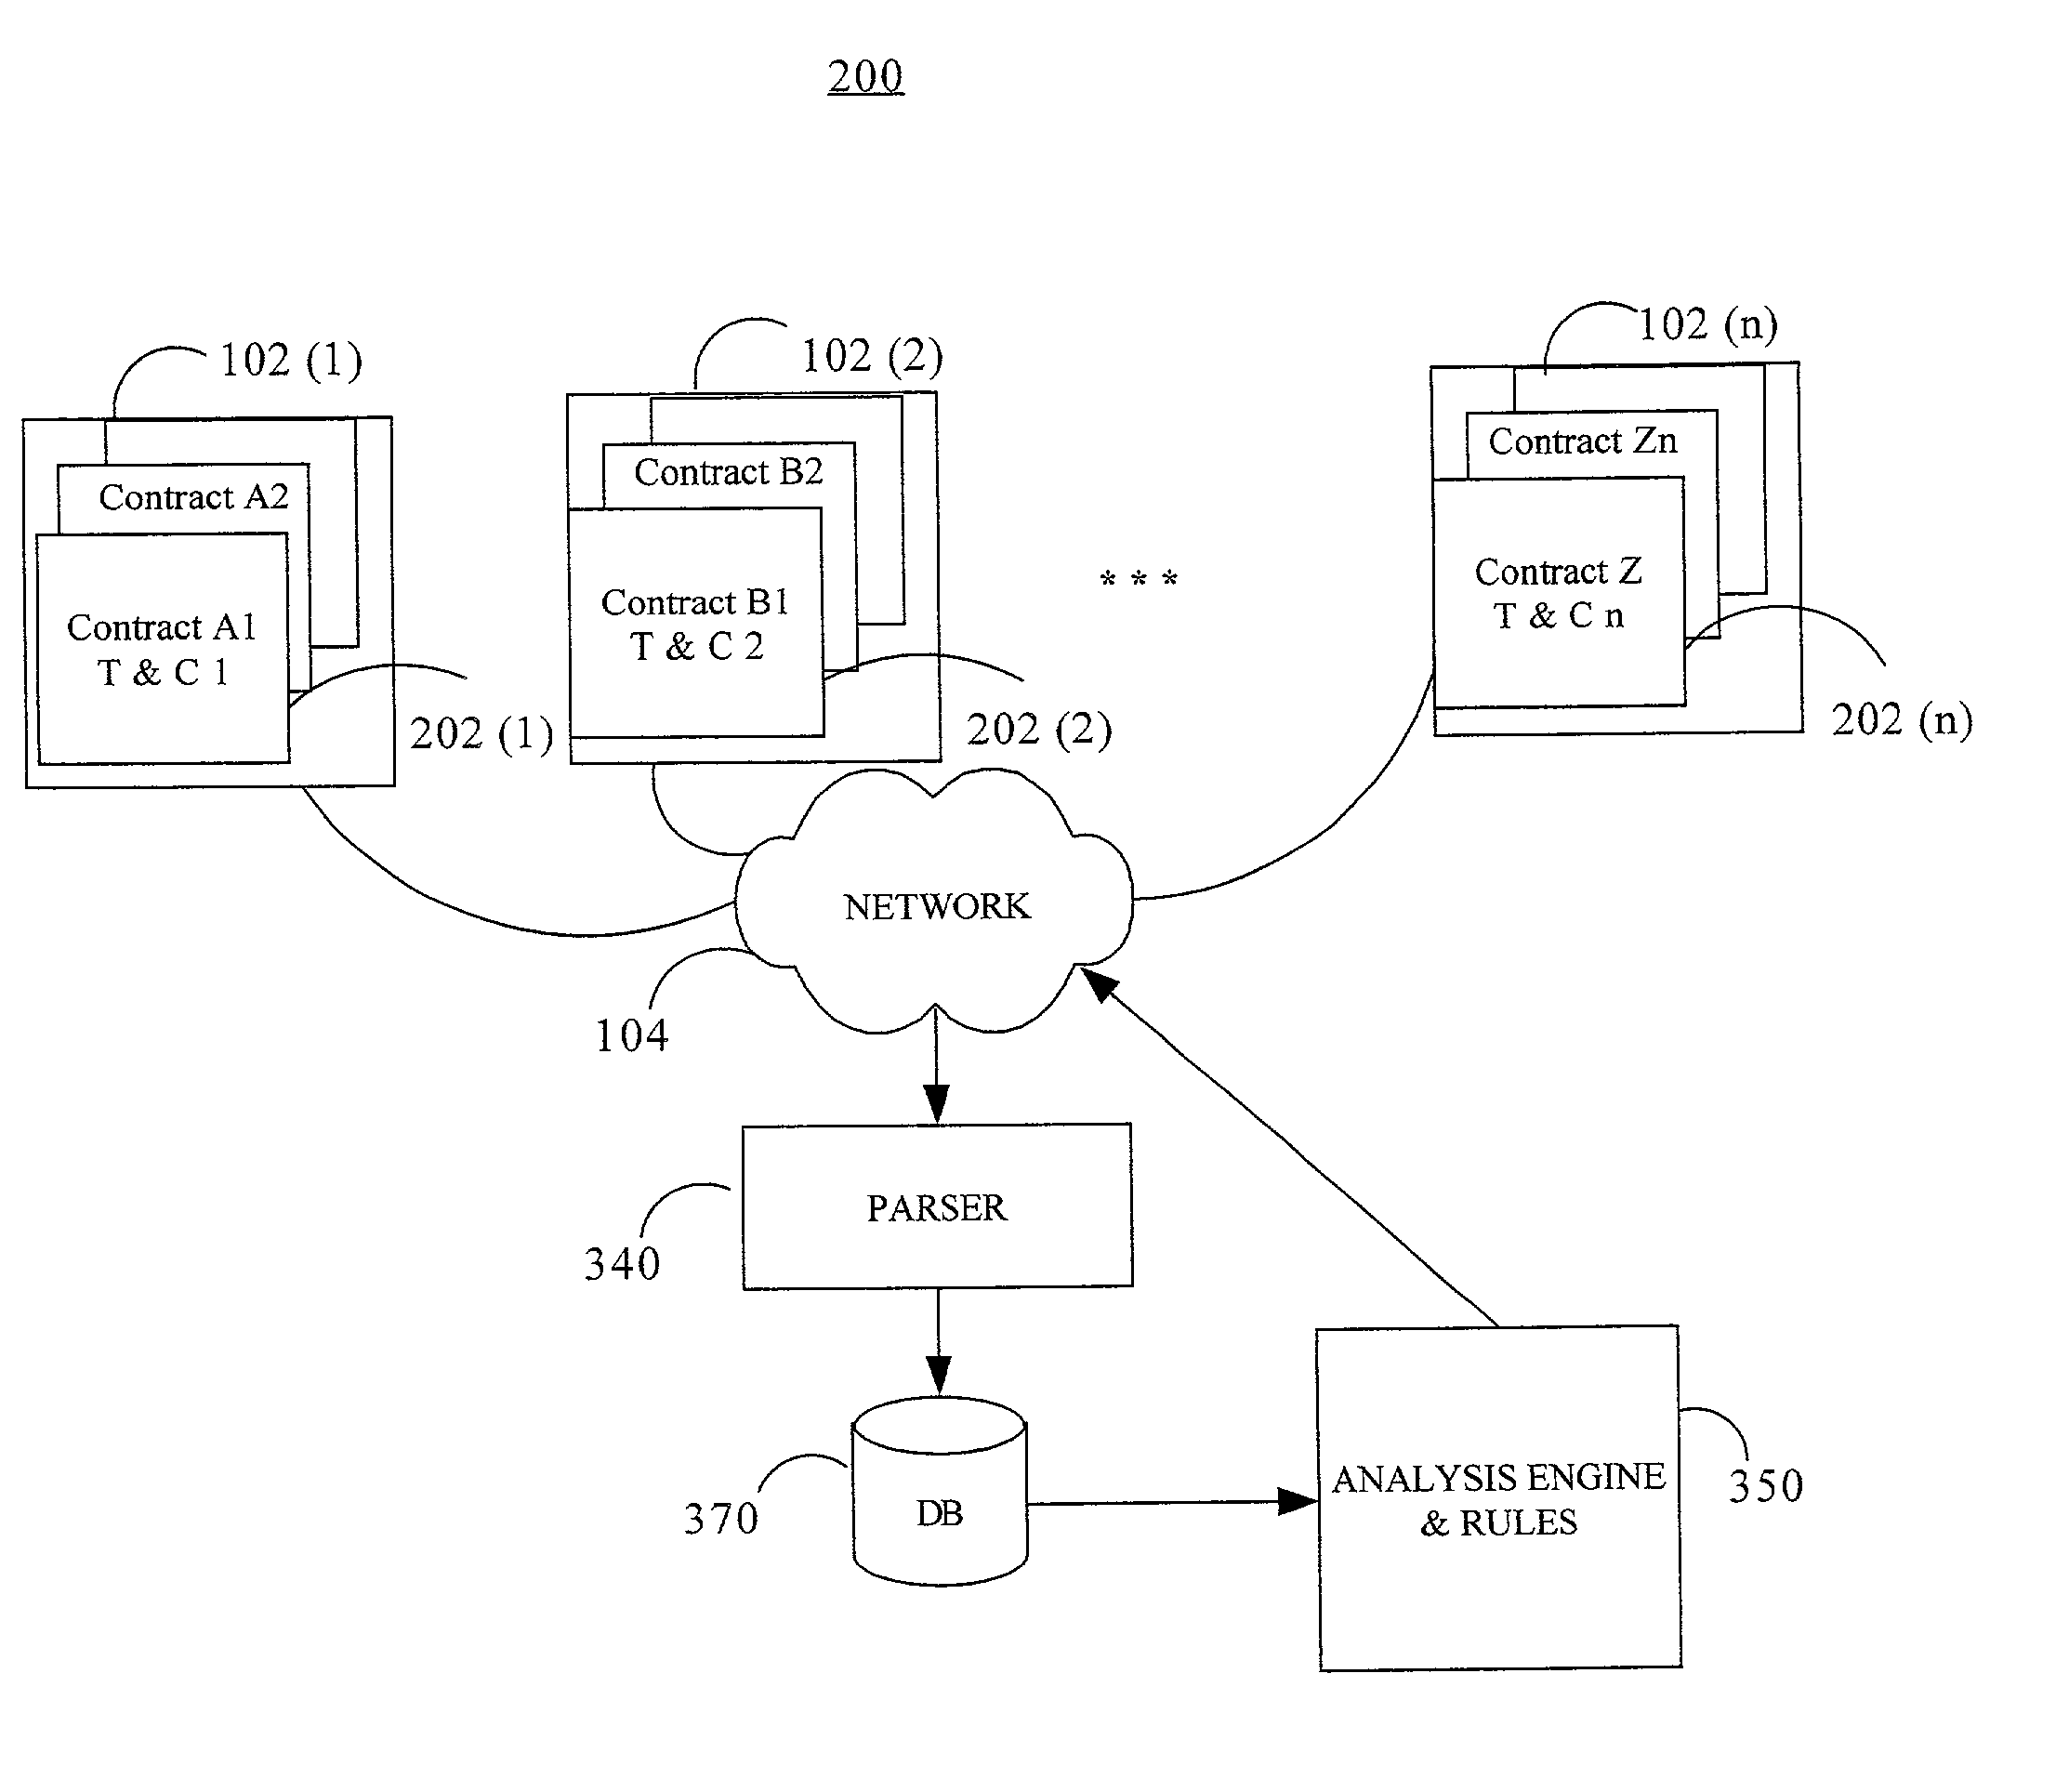 Method and system for managing and correlating orders in a multilateral environment